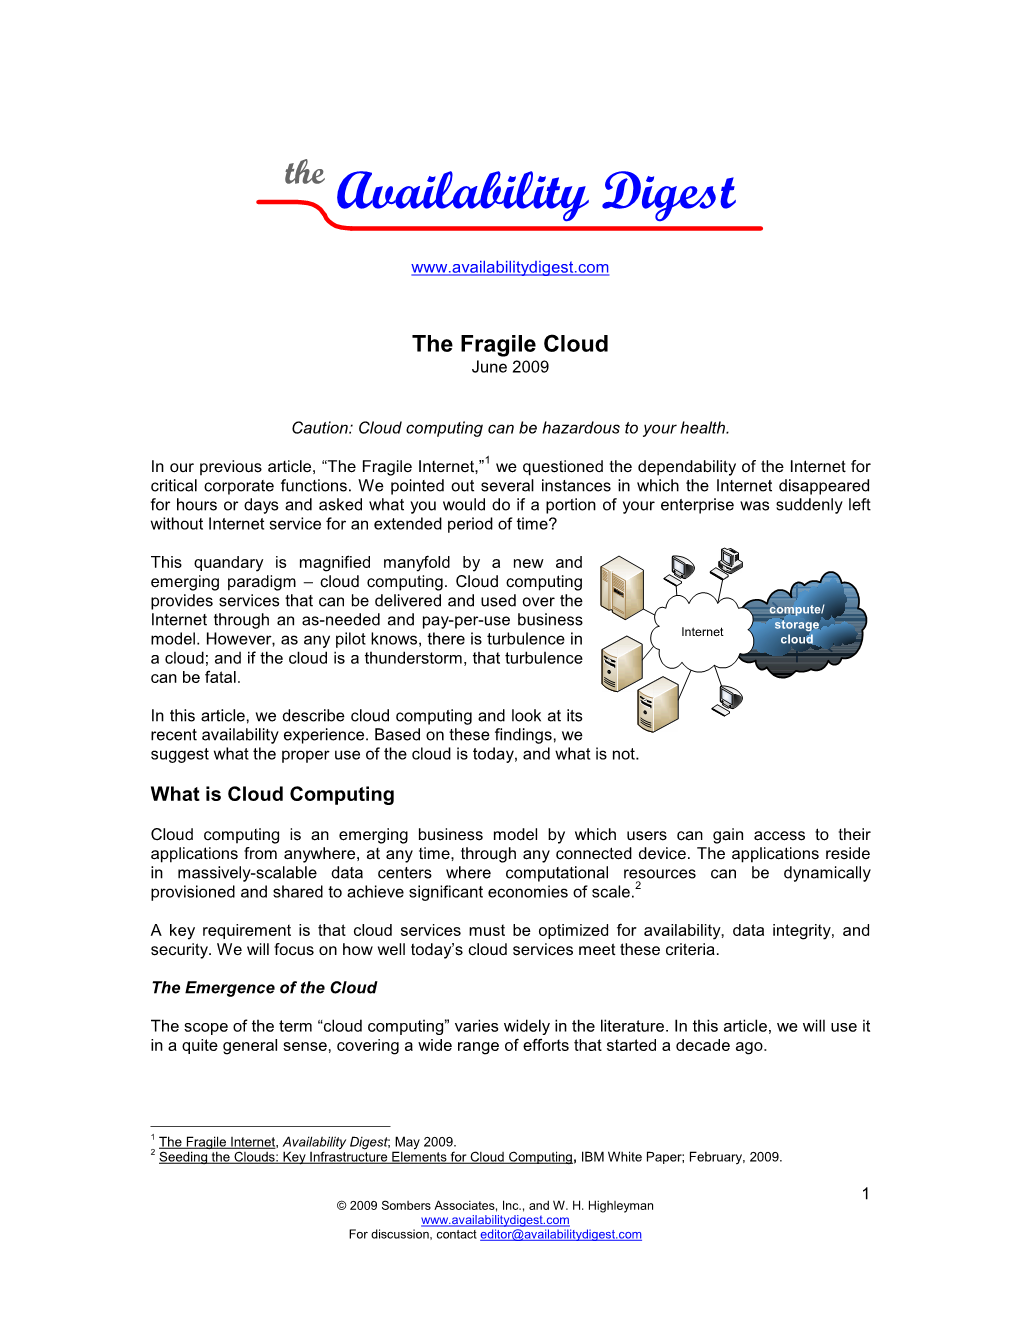 The Availability Digest